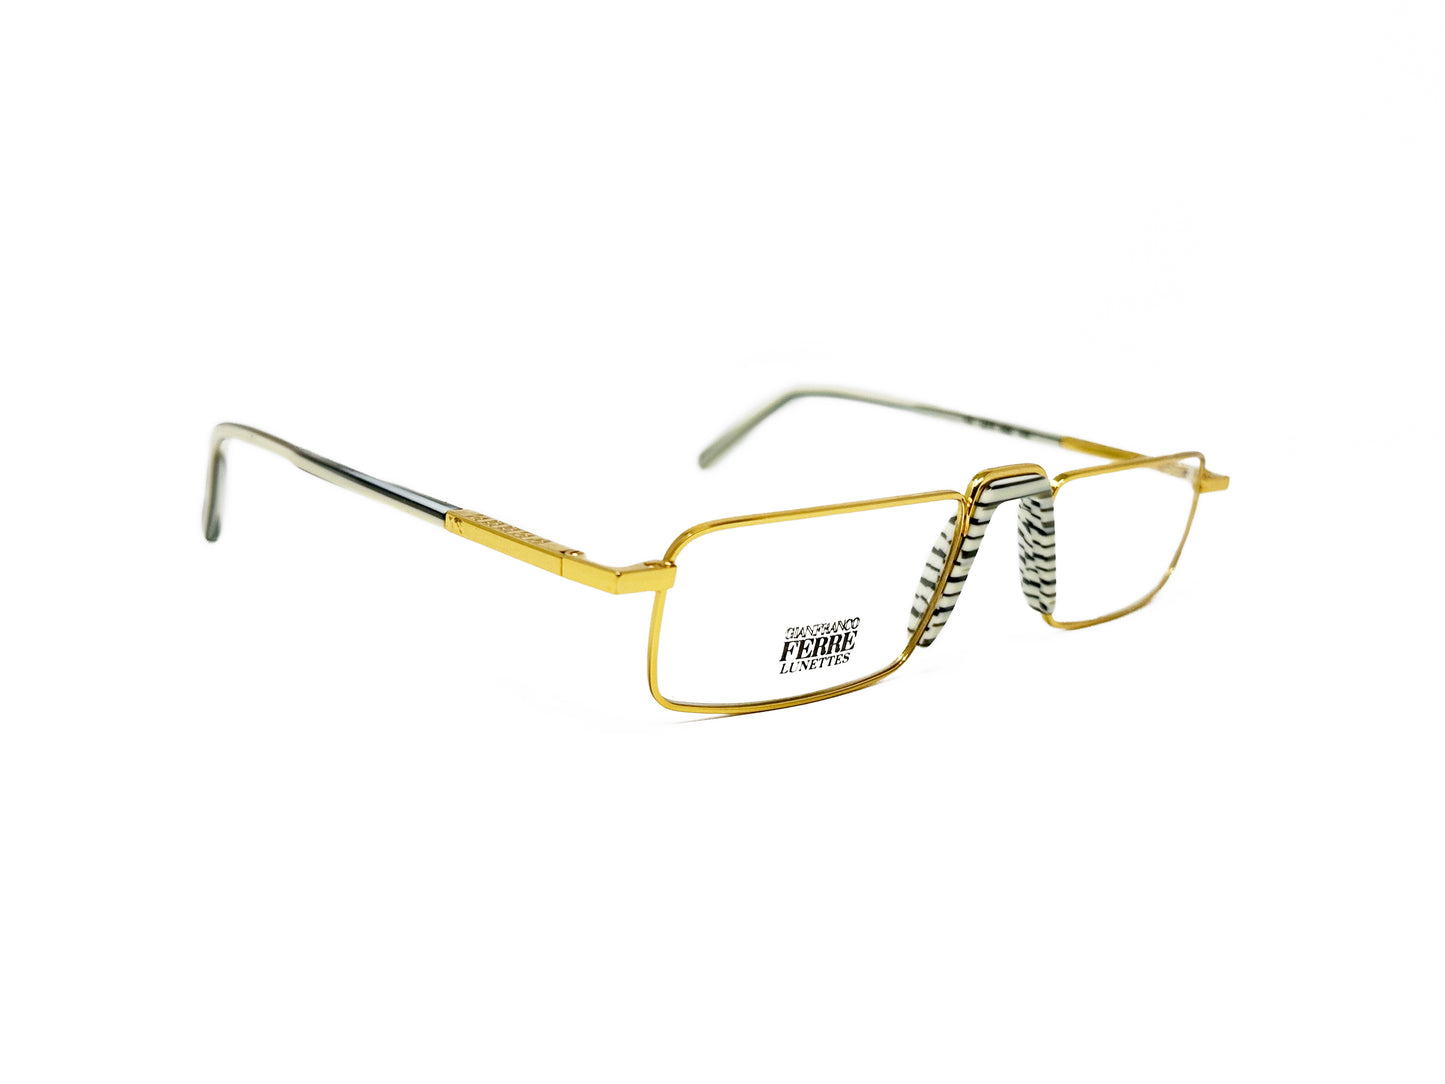 Ferre metal, low profile with raised bridge optical frame. Model: GFF362. Color: 032 - Gold metal with white/black striped nose piece. Side view.